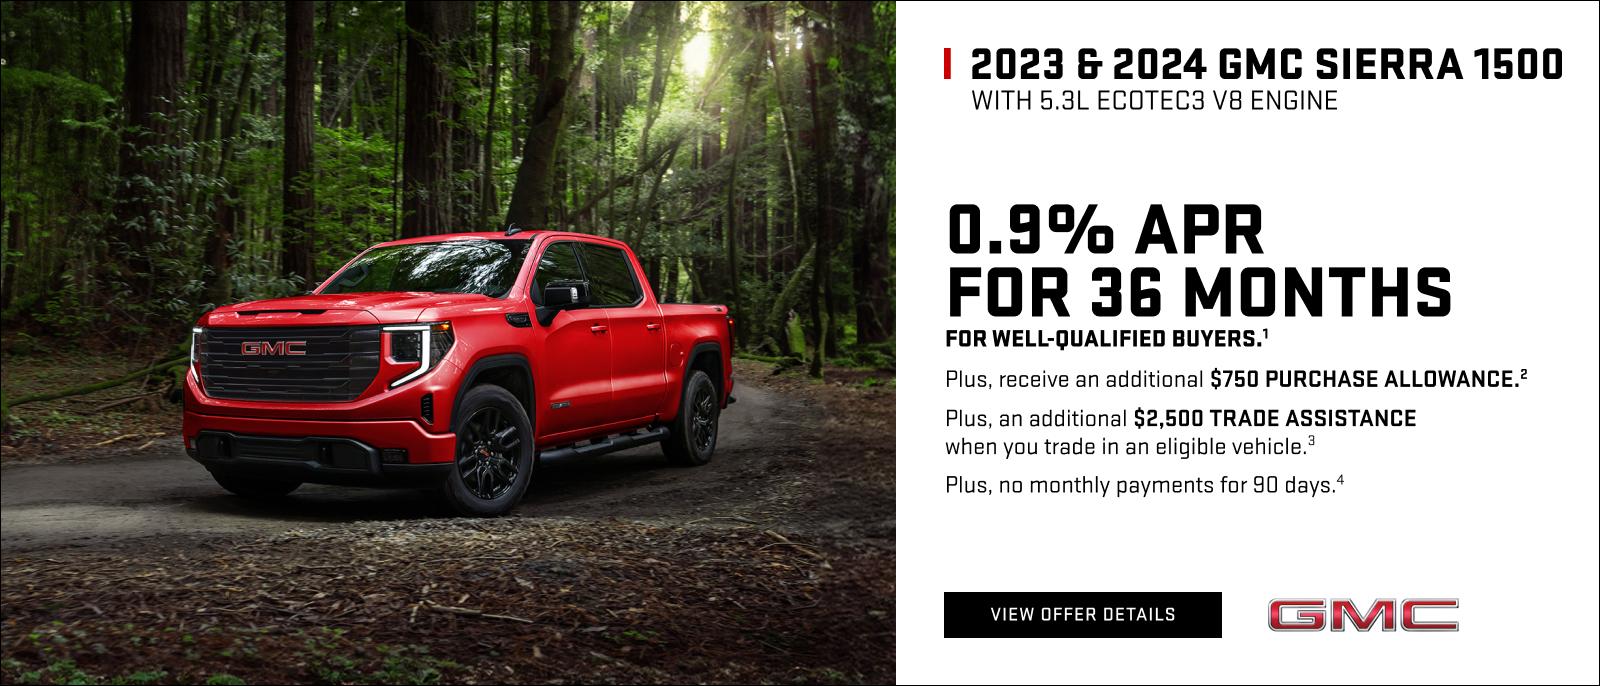 0.9% APR for 36 MONTHS for well-qualified buyers.1

Plus, receive an additional $750 PURCHASE ALLOWANCE.2

Plus, an additional $2,500 TRADE ASSISTANCE when you trade in an eligible vehicle.3

PLUS, NO MONTHLY PAYMENTS FOR 90 DAYS. 4